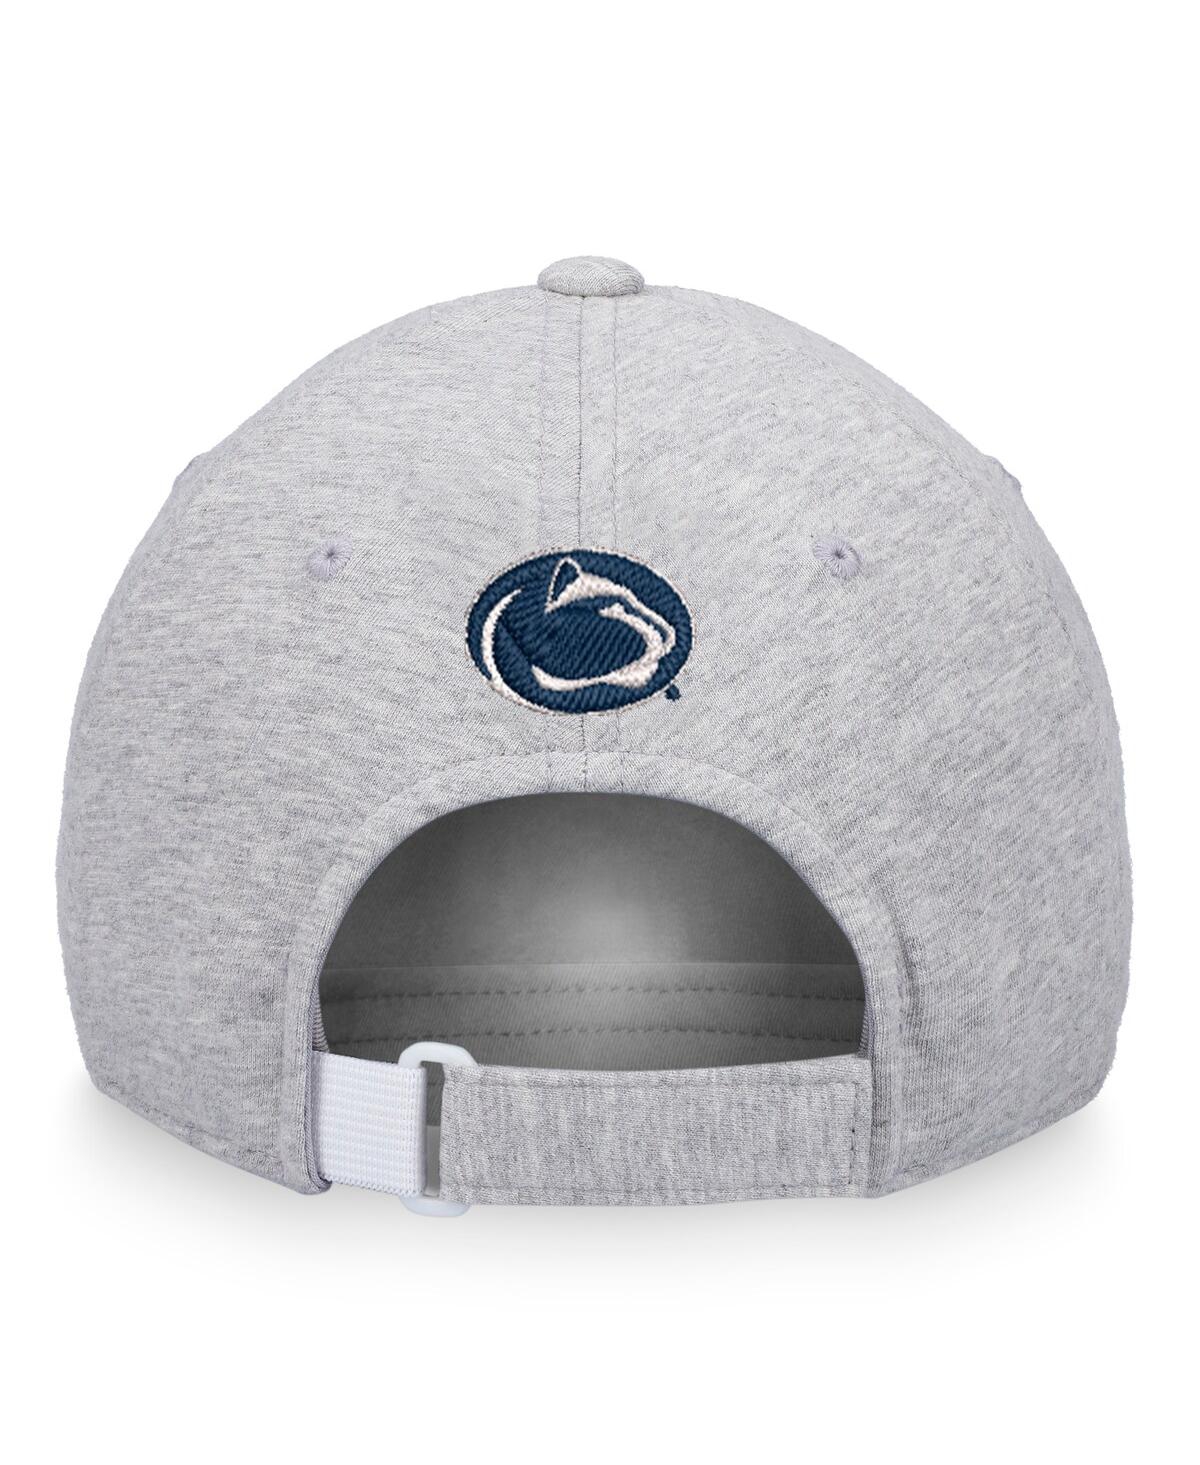 Shop Top Of The World Women's  Heathered Gray Penn State Nittany Lions Christy Adjustable Hat